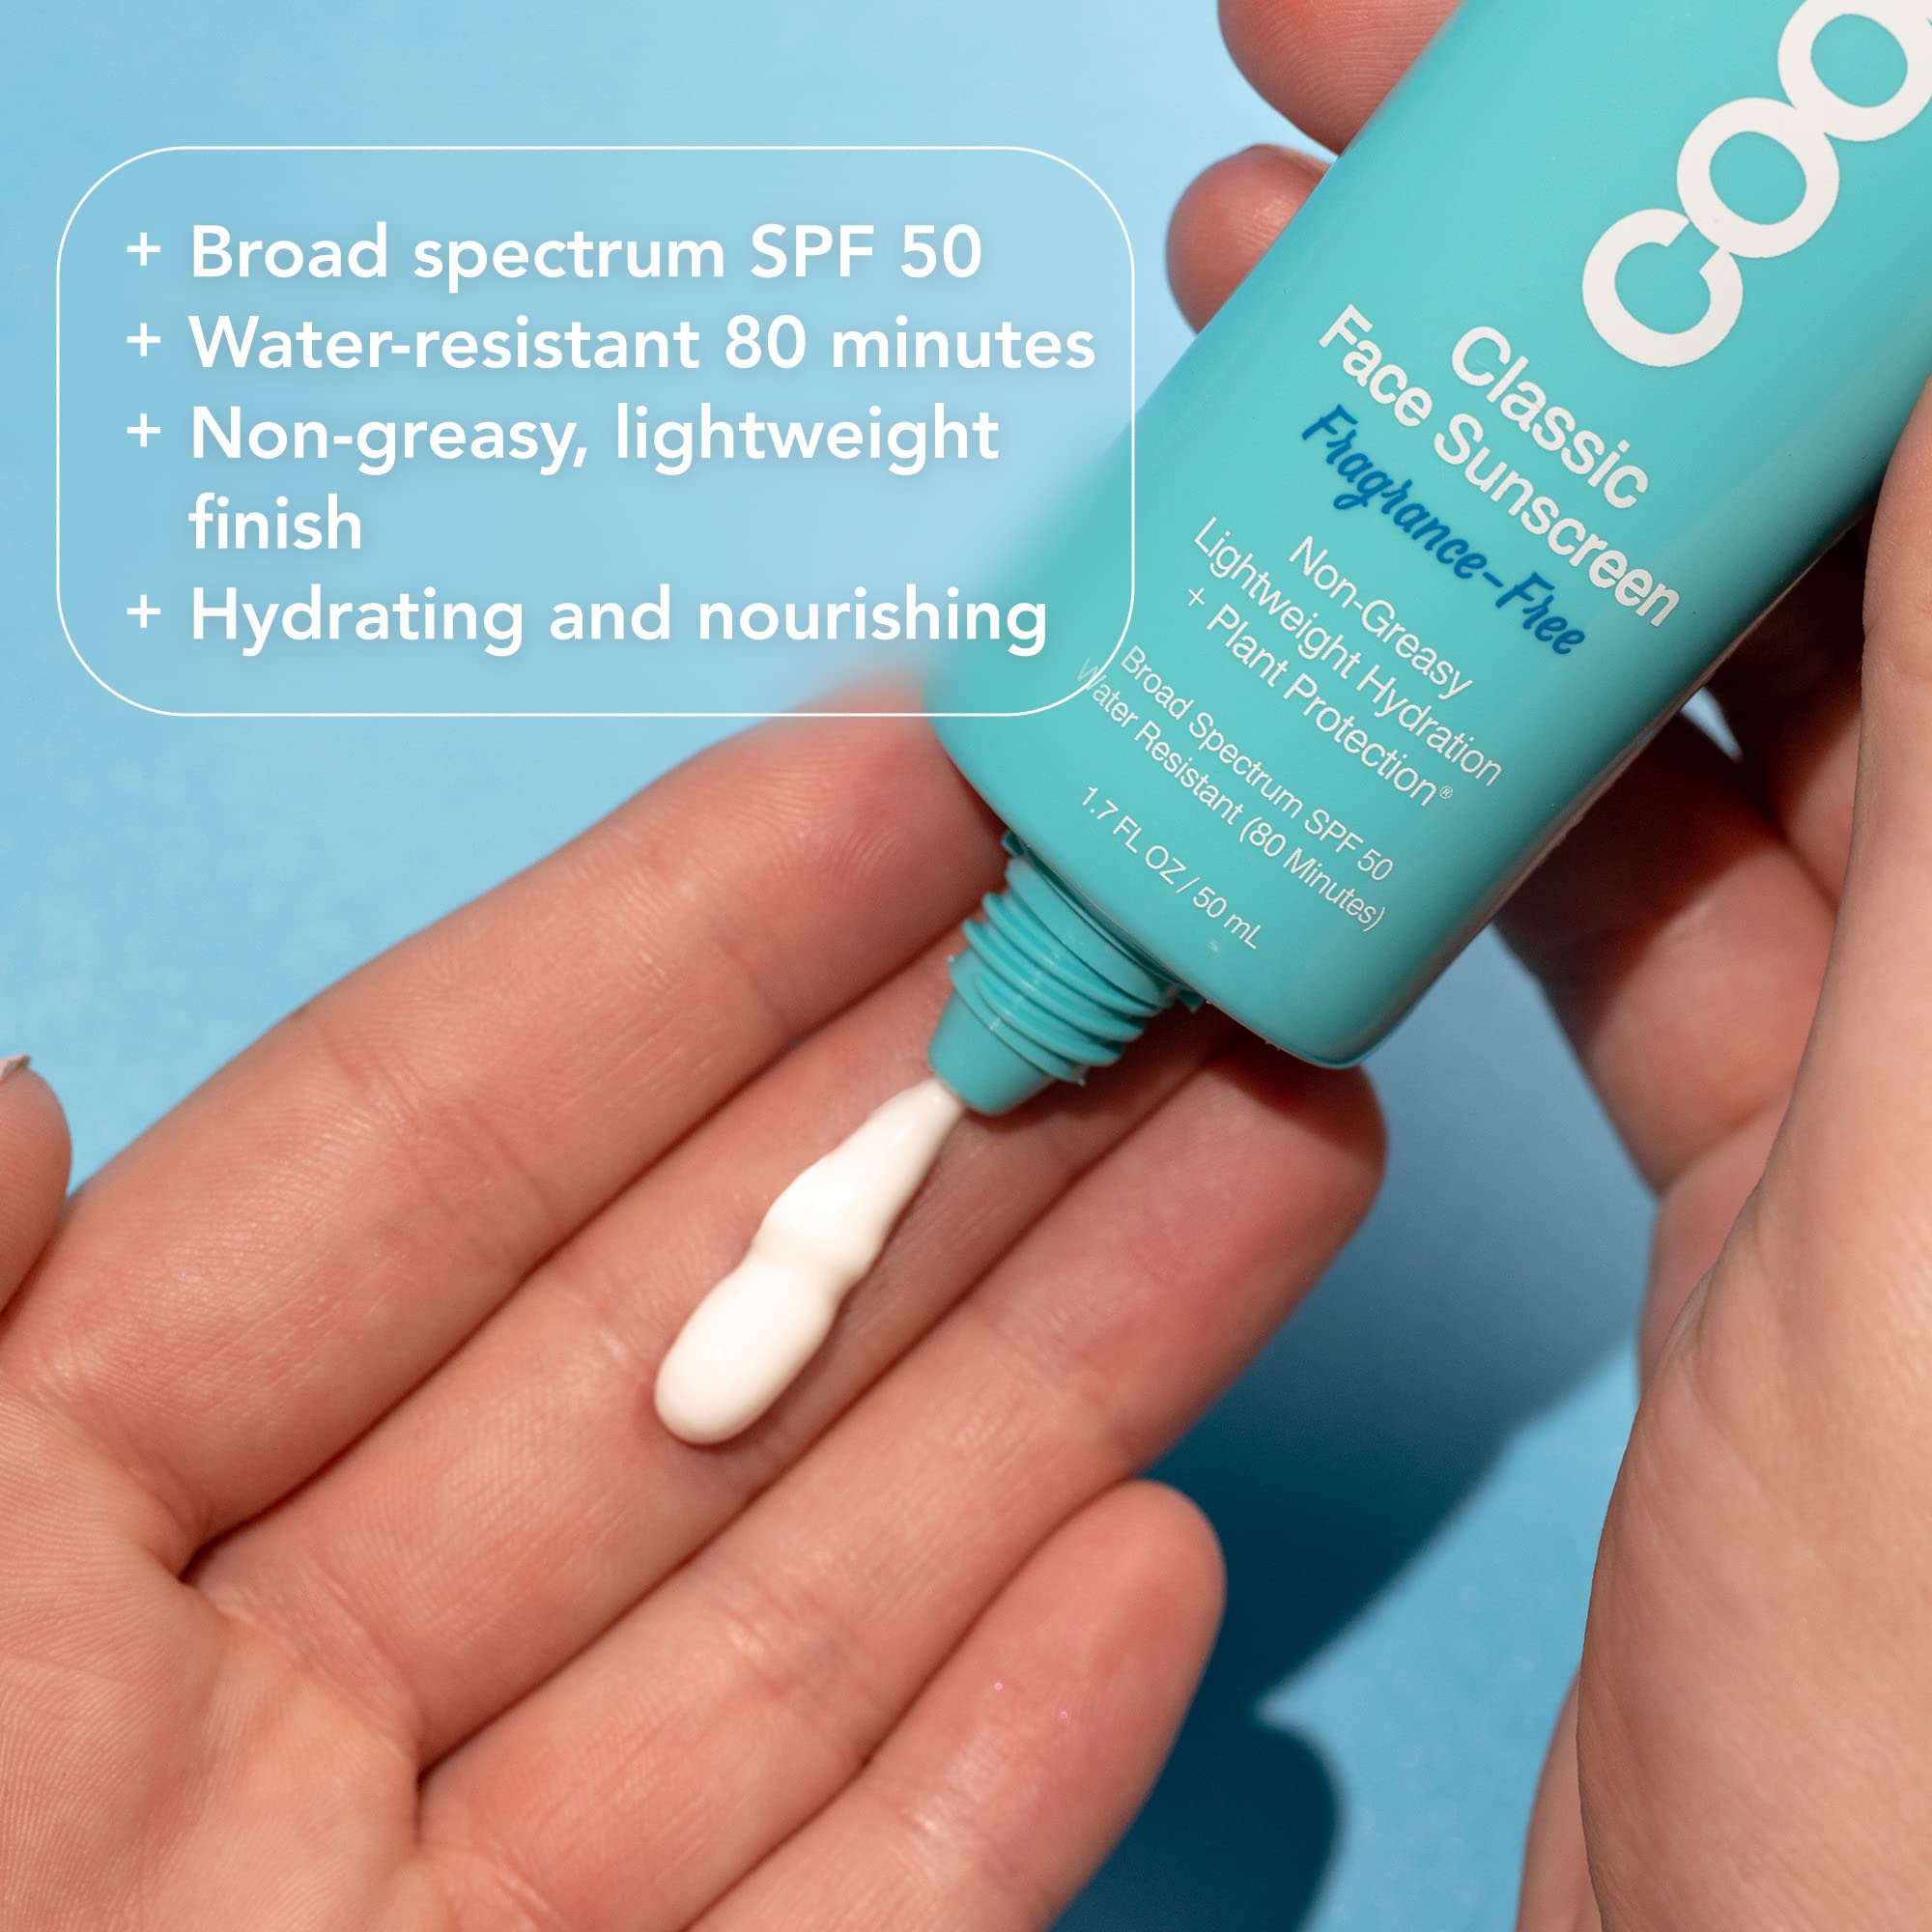 Coola COOLA Organic Face Sunscreen SPF 50 Sunblock Lotion, Dermatologist Tested Skin Care for Daily Protection, Vegan and Gluten Free